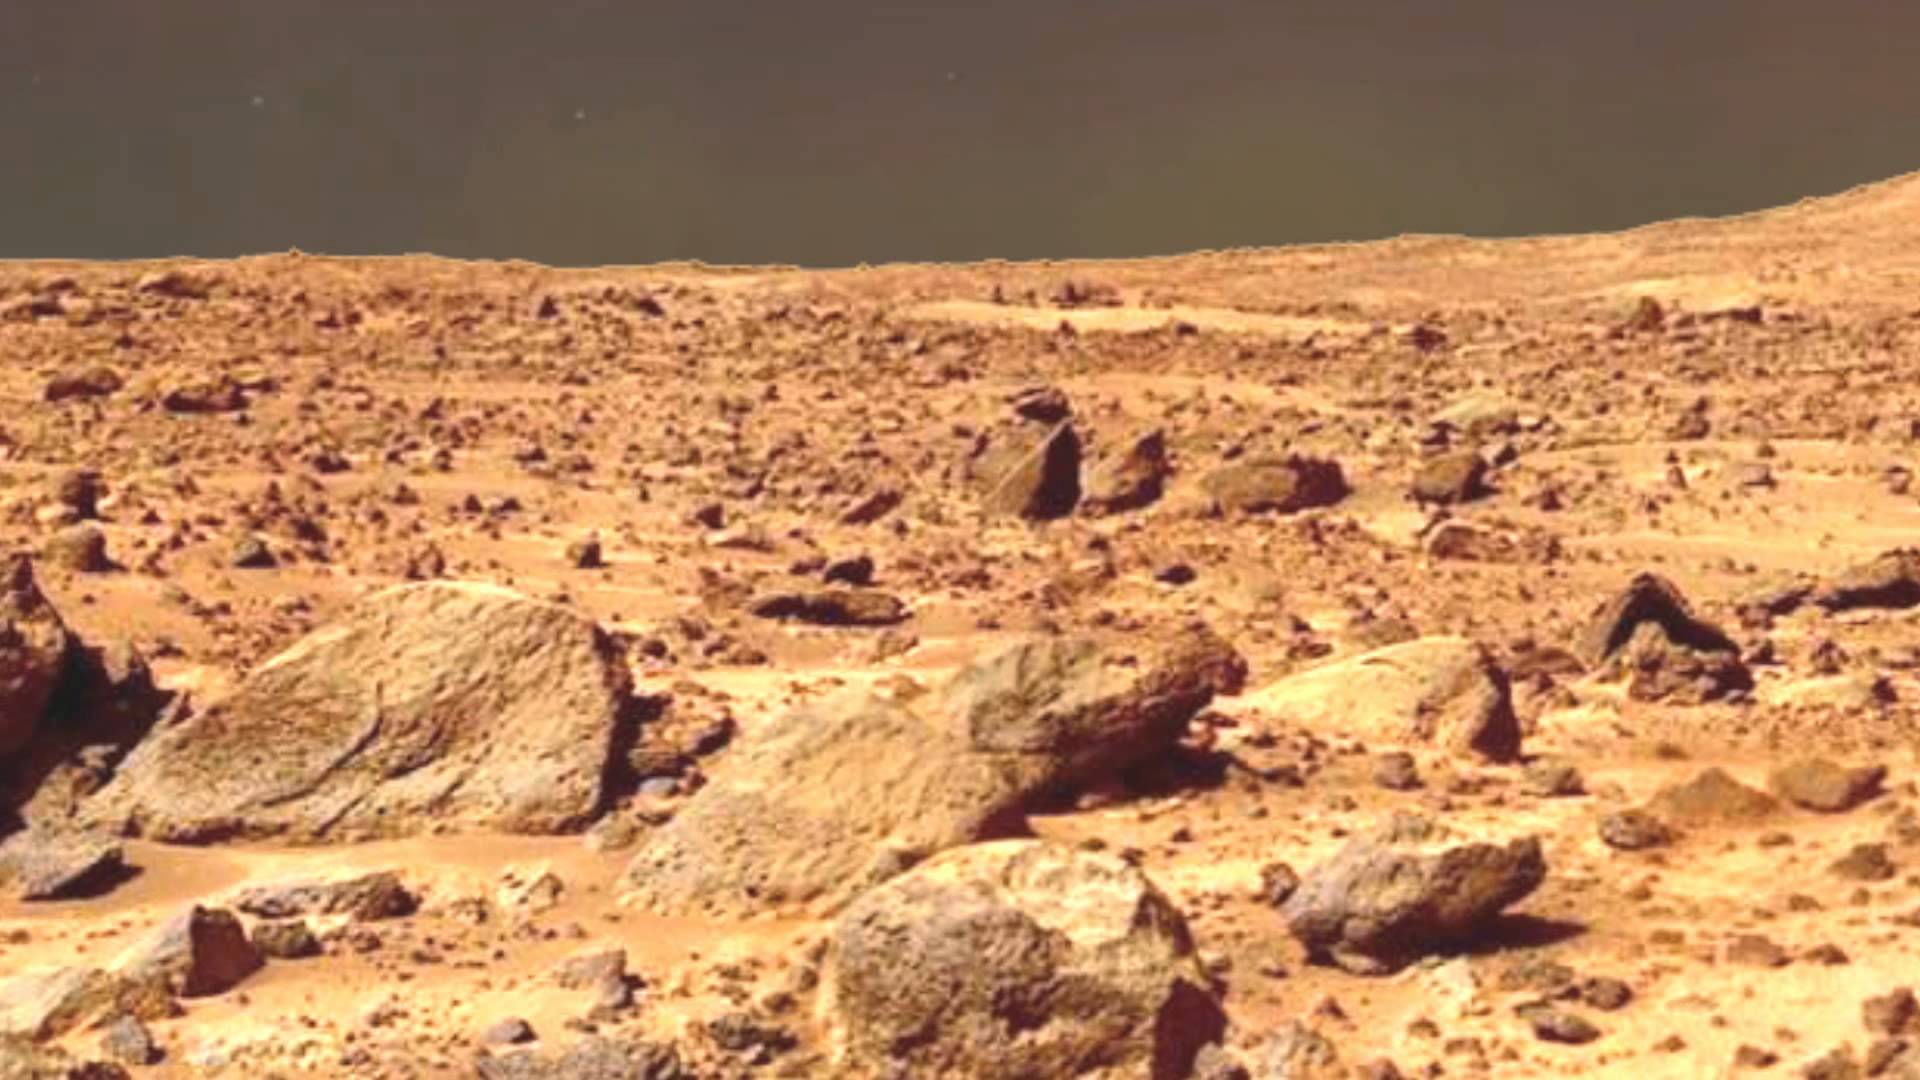 Today's Top Story: We Land On Mars And People Are Claiming It's Fake